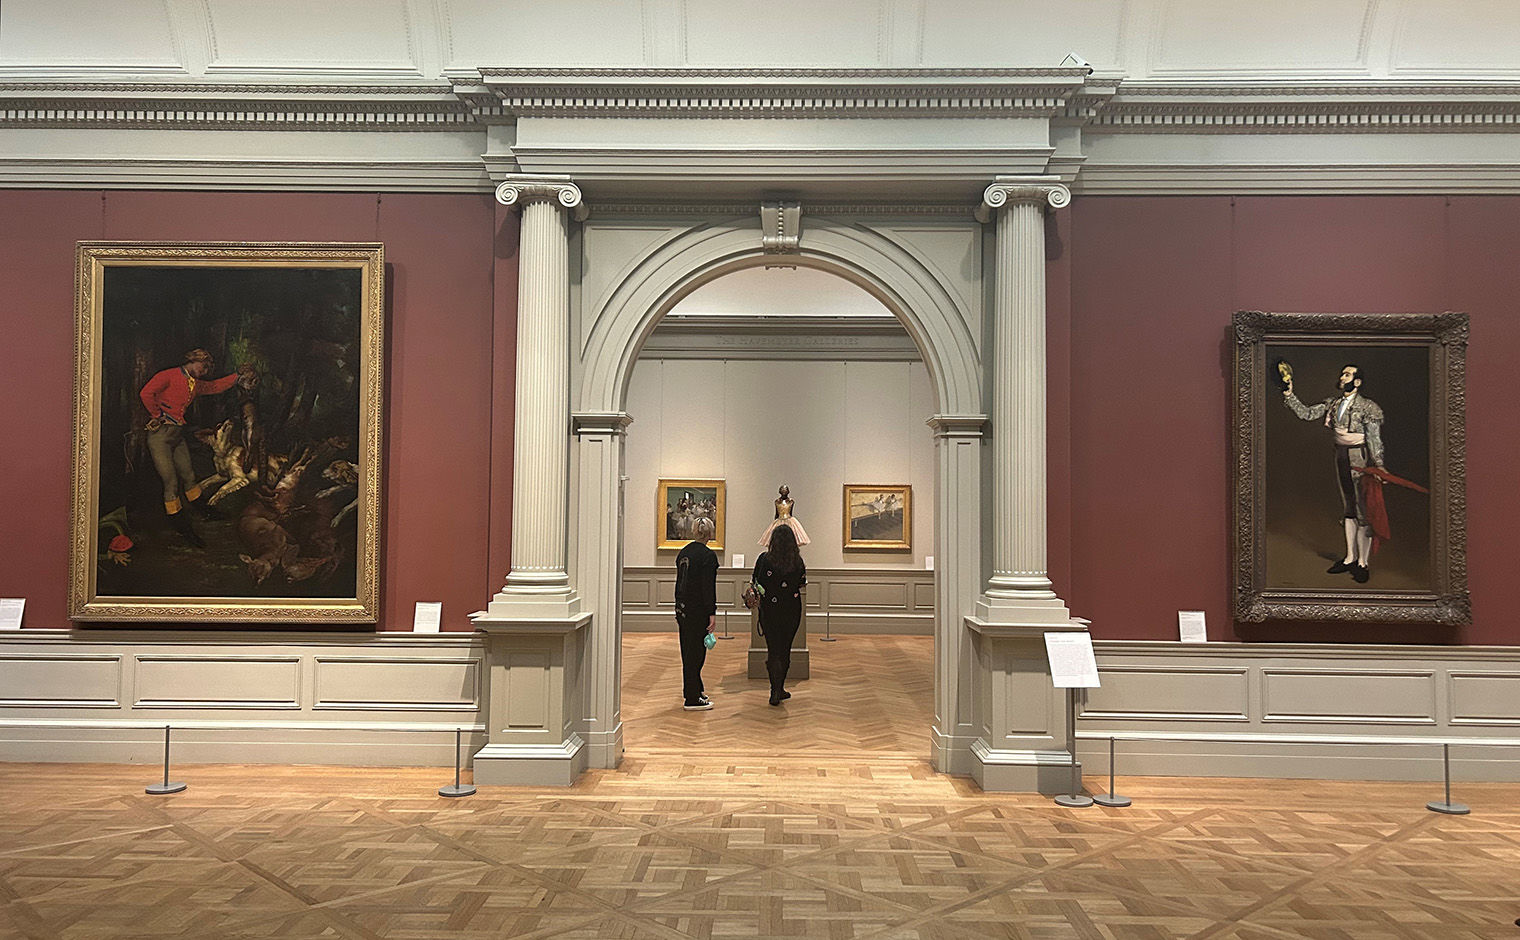 A view of Galley 810, looking into Gallery 815. Flanking the doorway are two paintings,  Courbet's "After the Hunt" on the left and Manet's "A Matador" on the right.